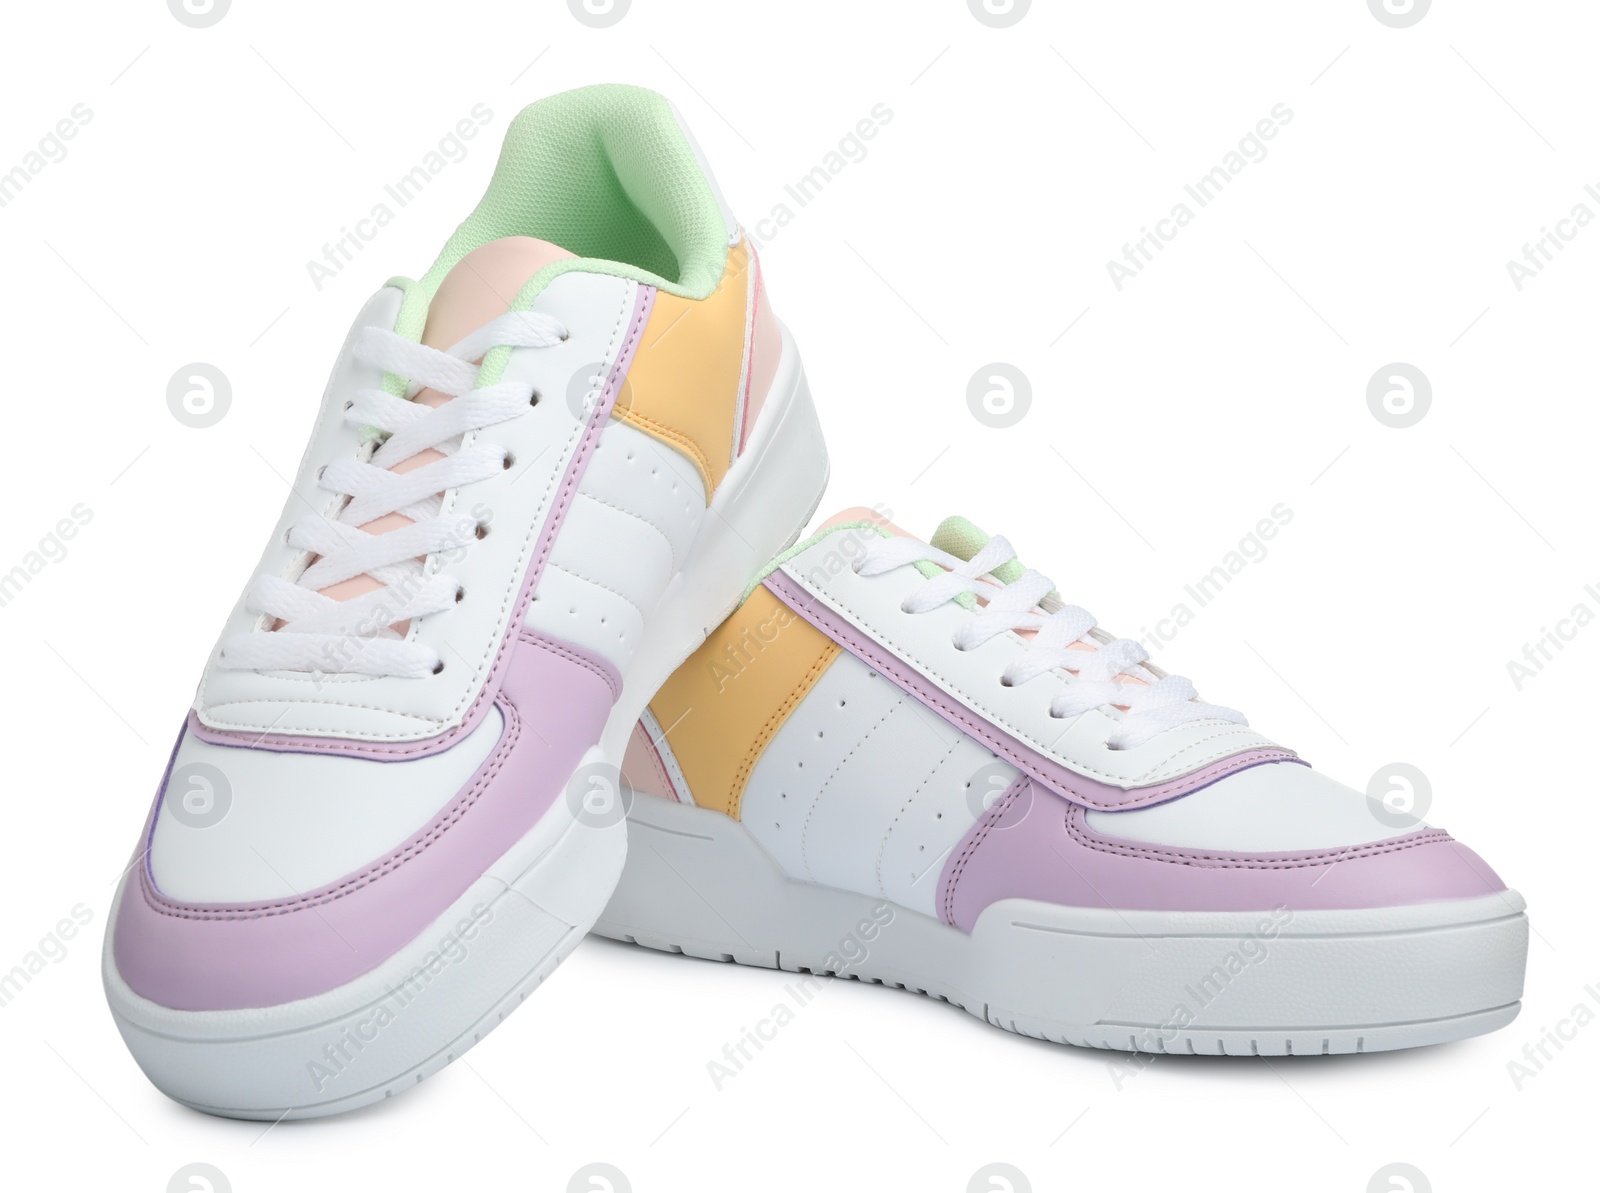 Photo of Pair of comfortable sports shoes on white background